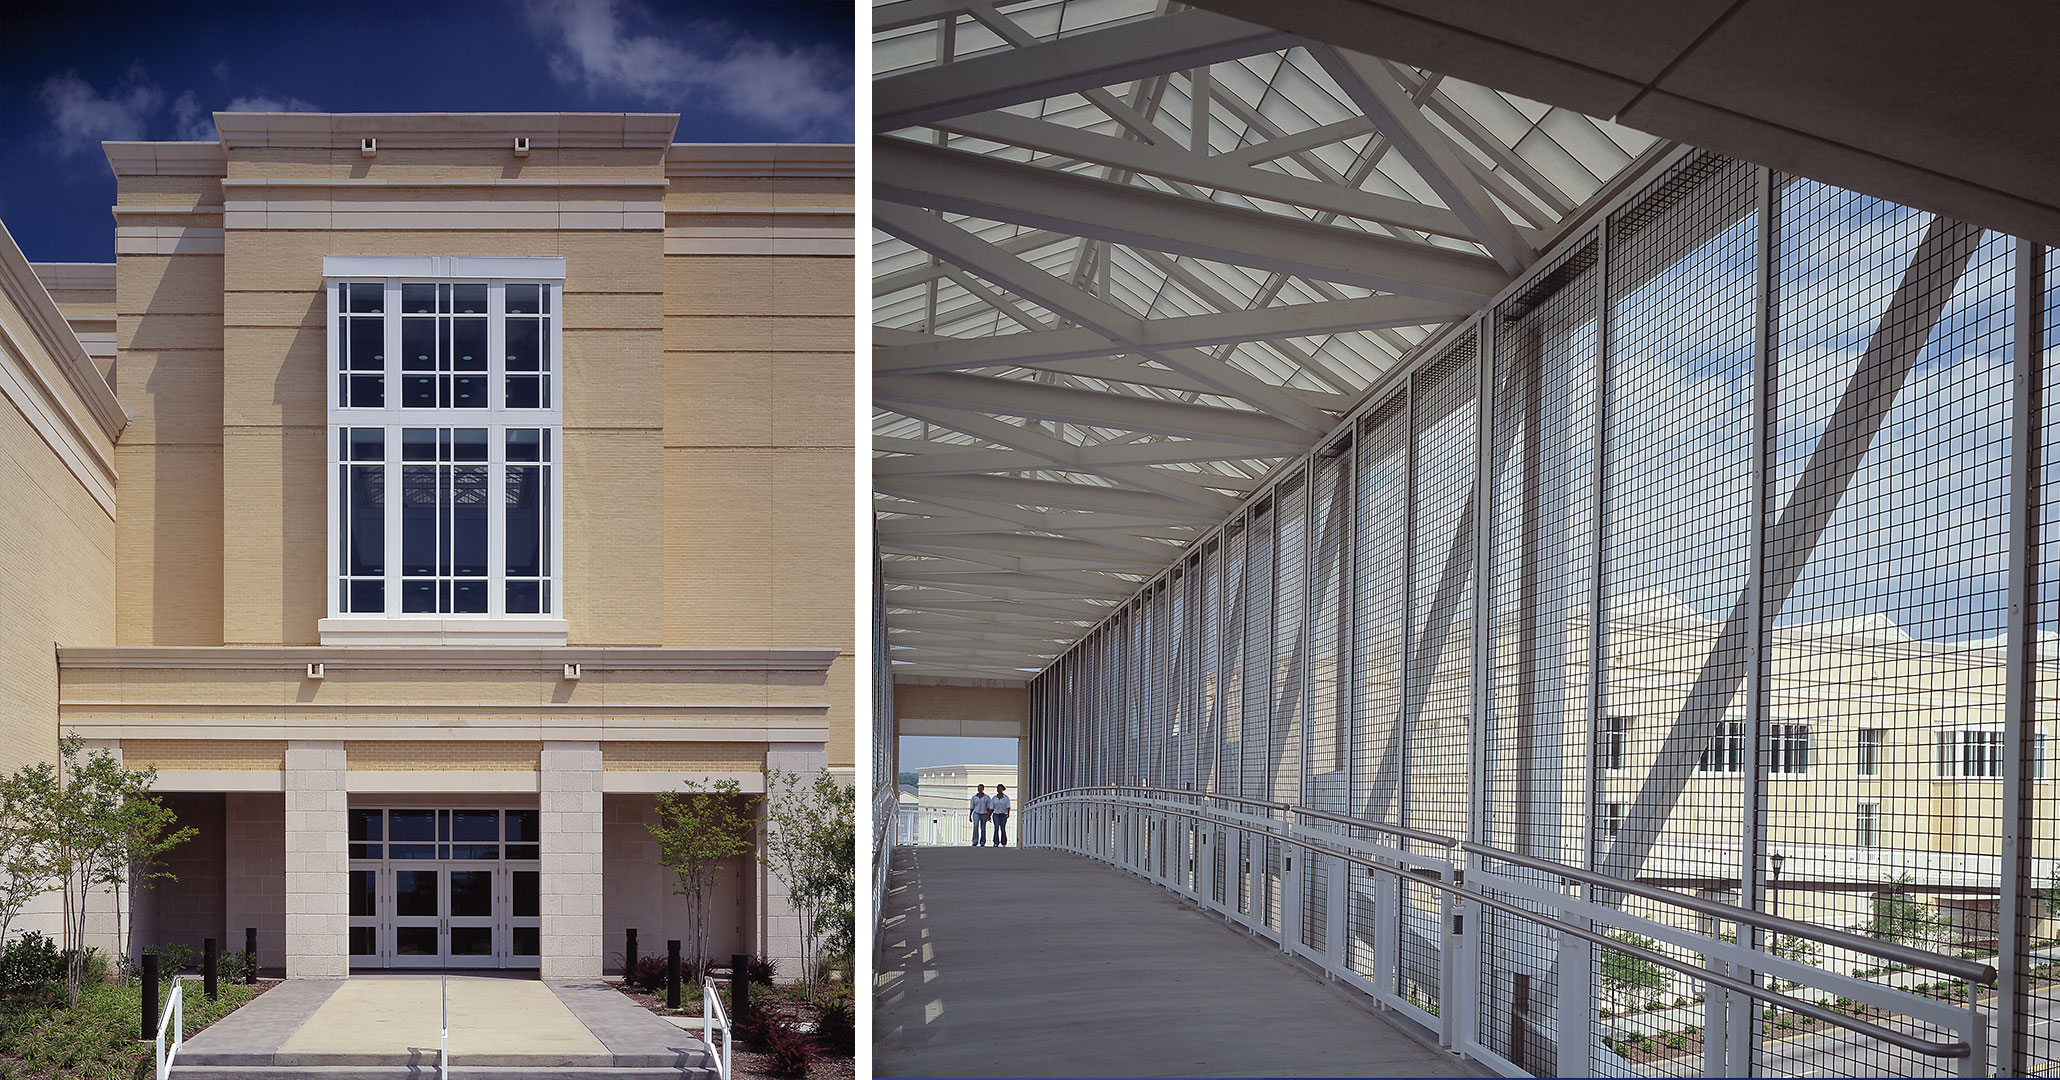 University of South Carolina worked with Boudreaux designers to build the Strom Thurmond Wellness Center in downtown Columbia, SC.